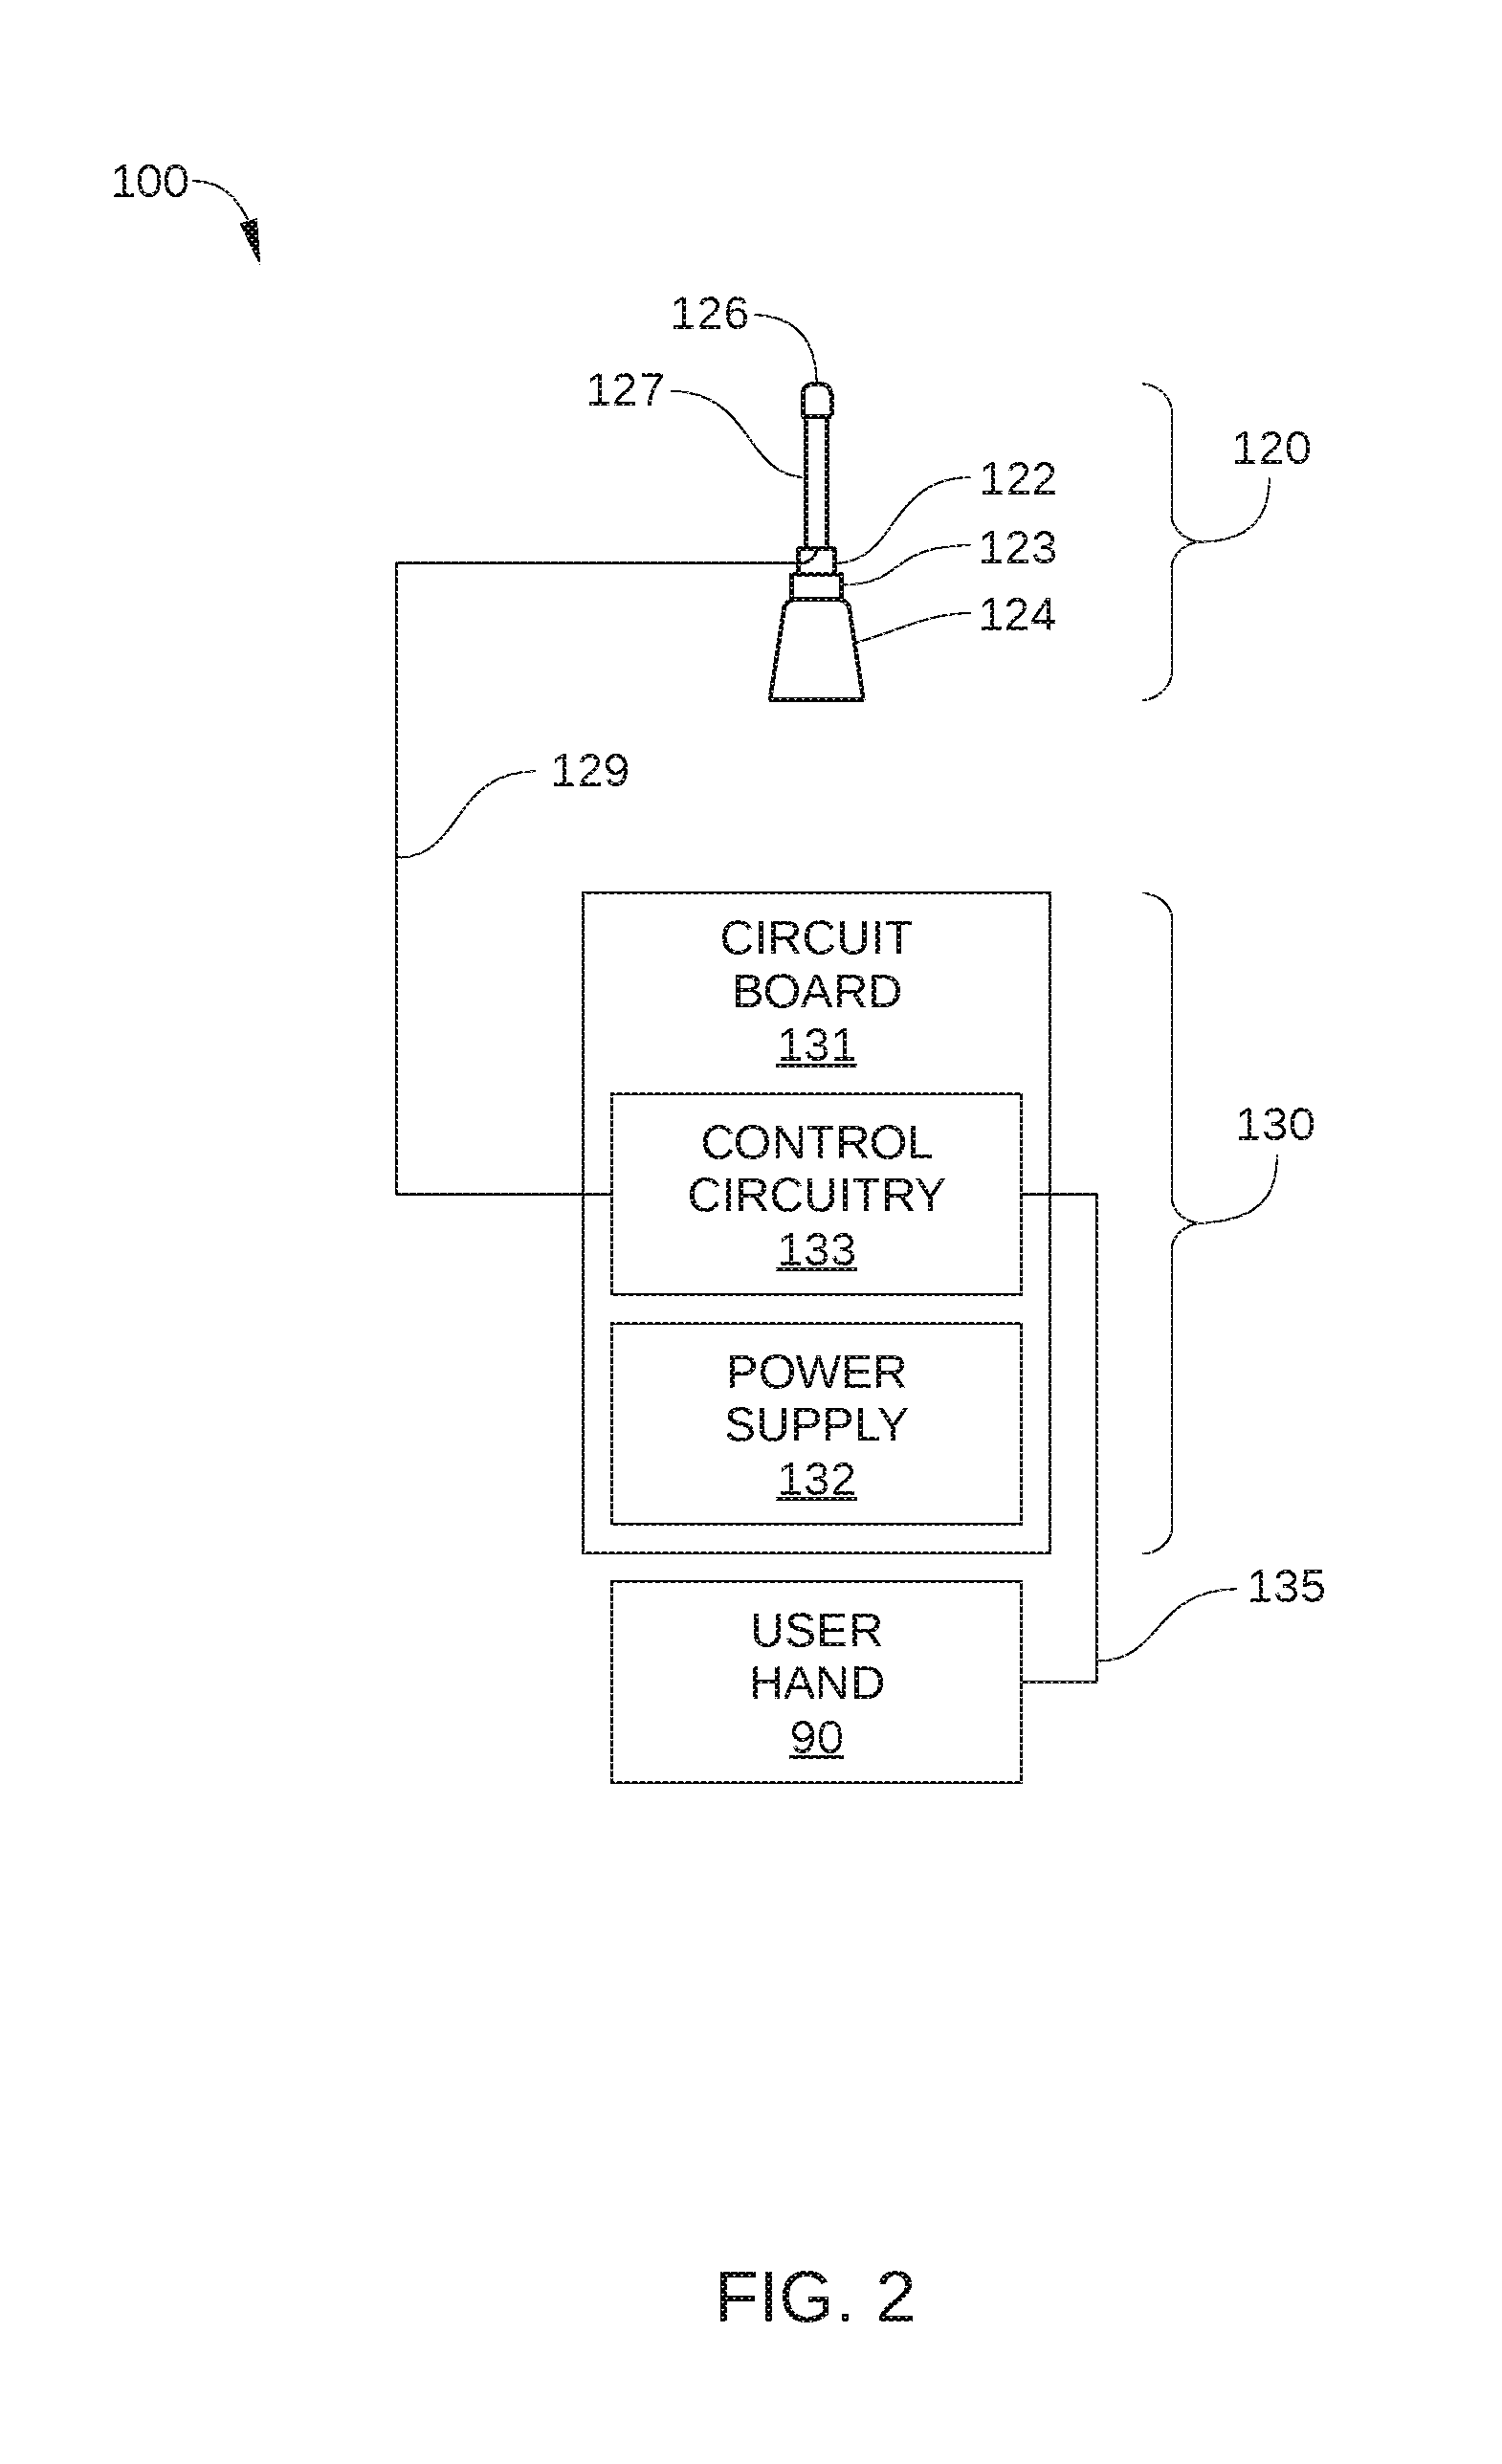 Enhancing input on small displays with a finger mounted stylus